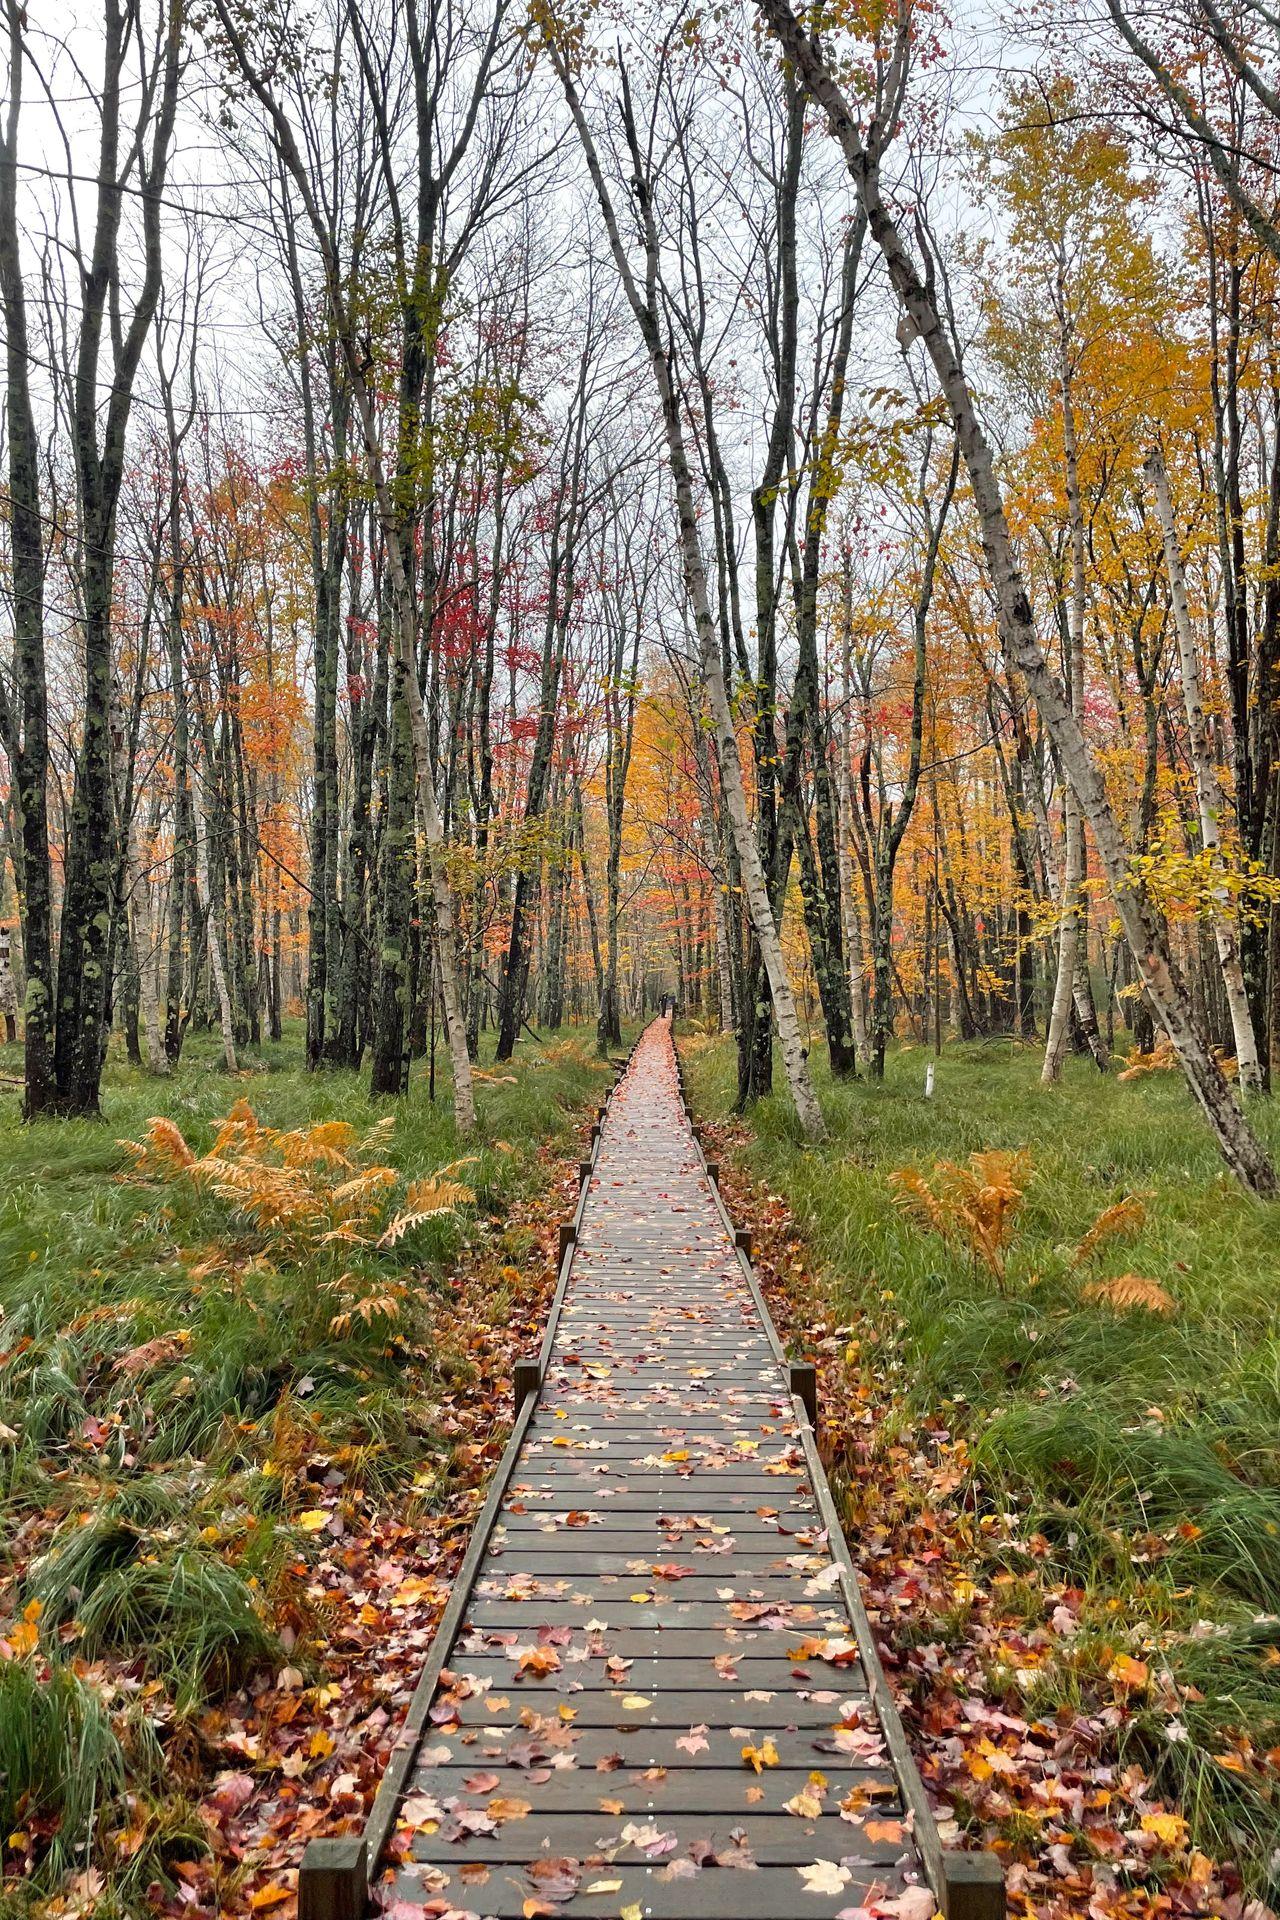 Looking down the boardwalk of the Jesup Path, surrounded by fall foliage.